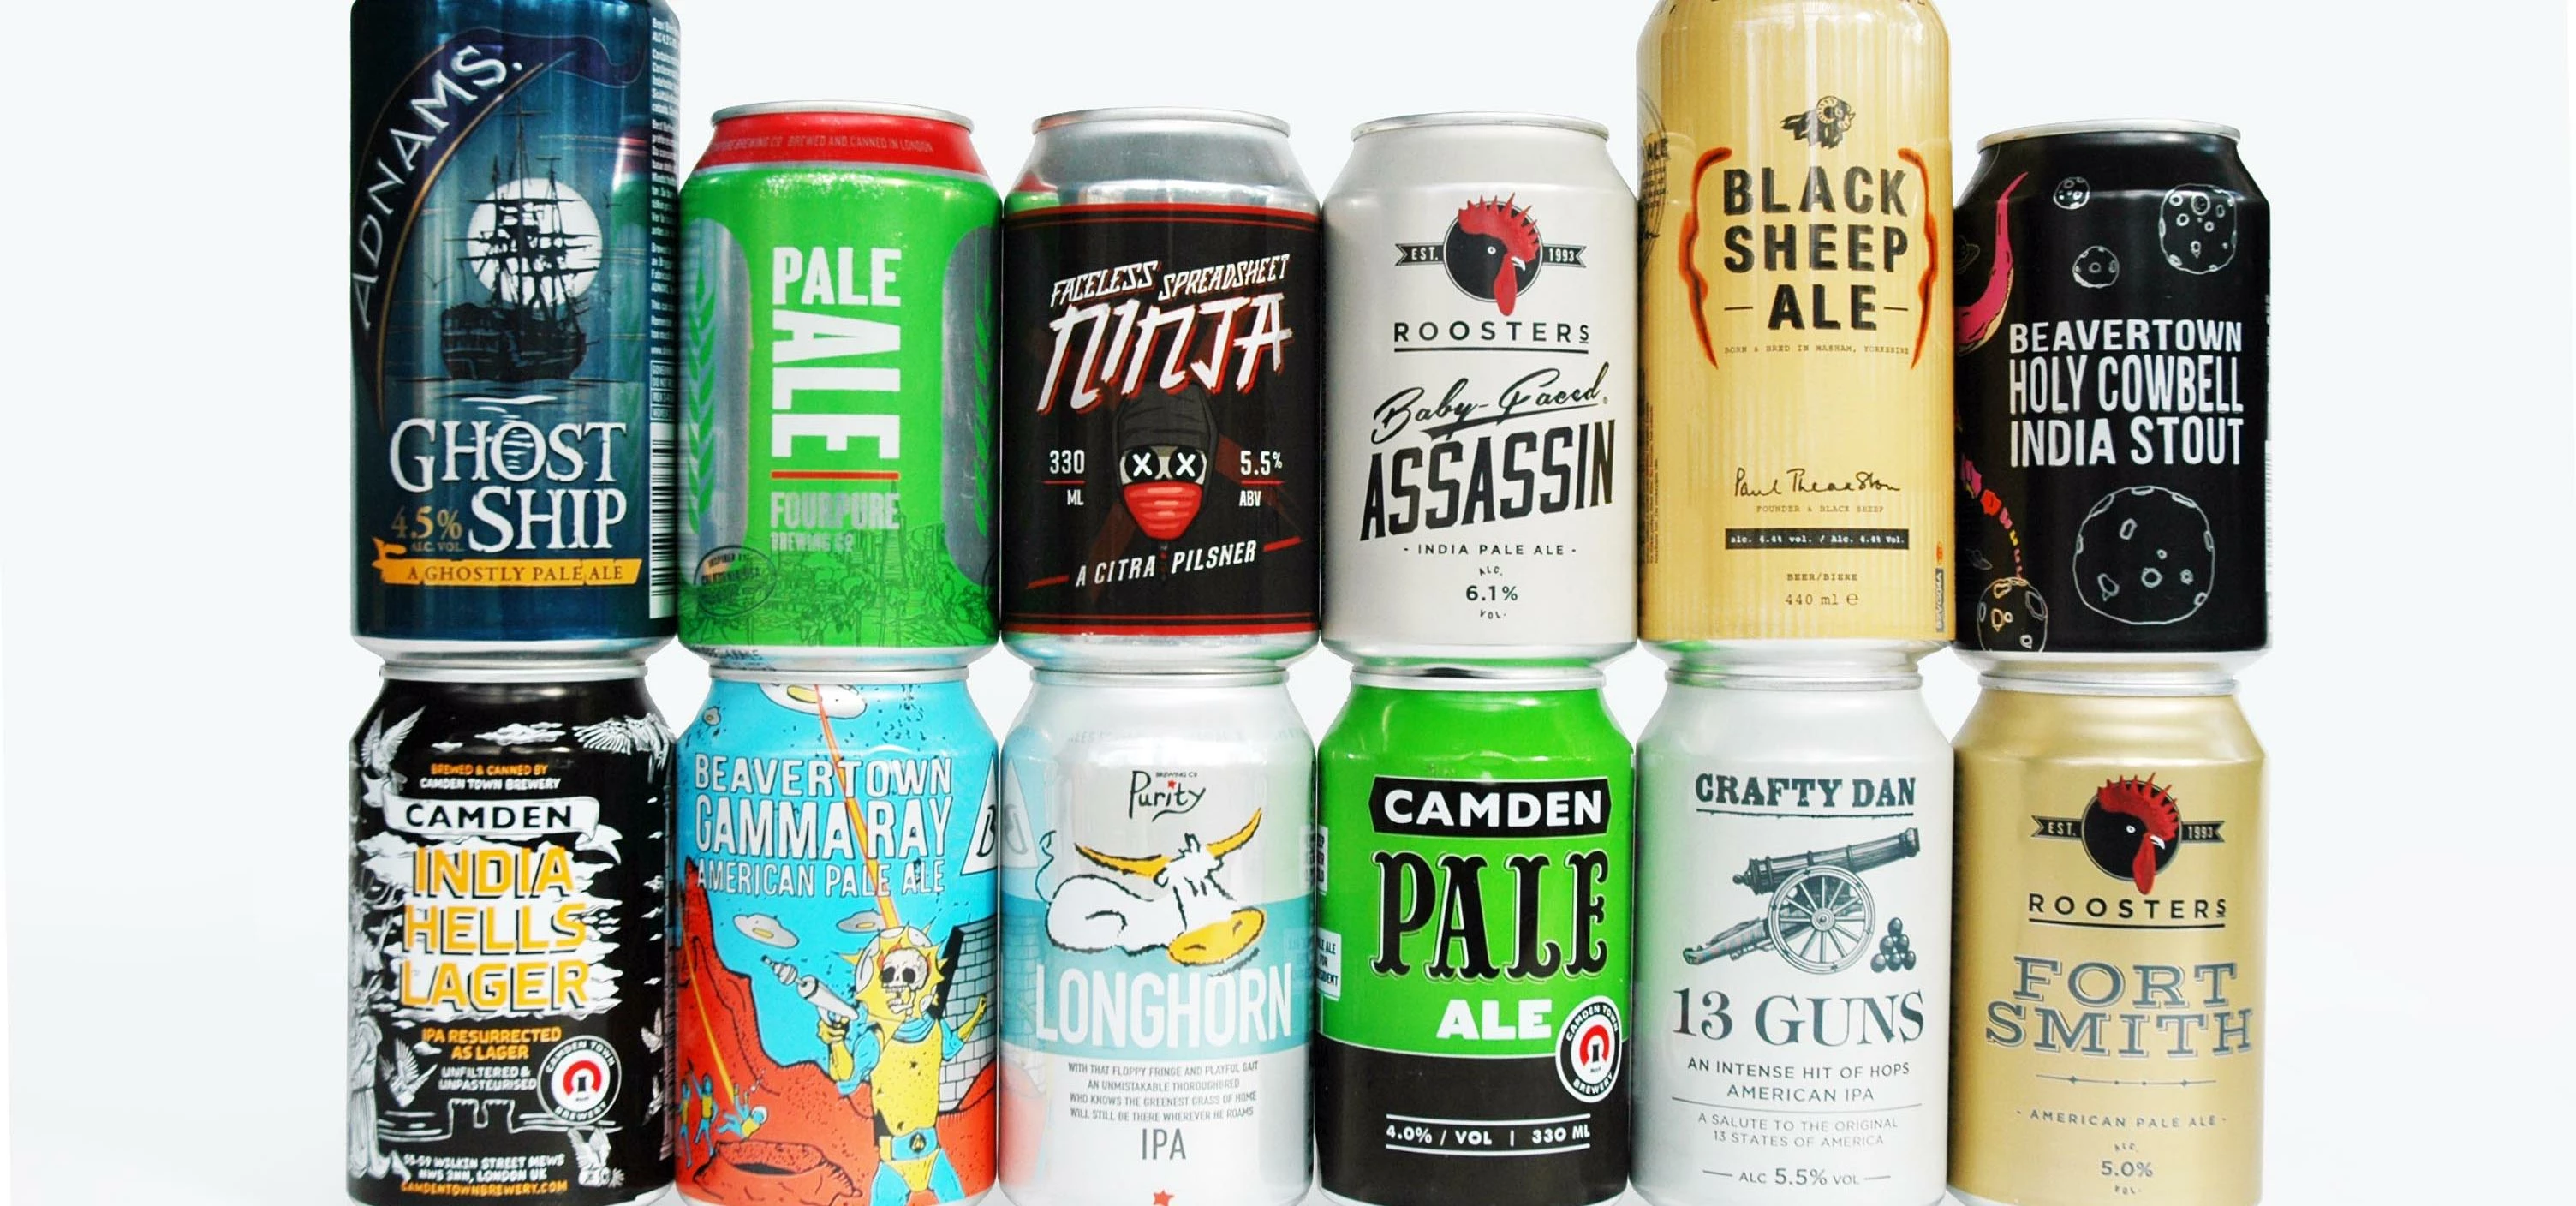 Indie beer cans are hot news